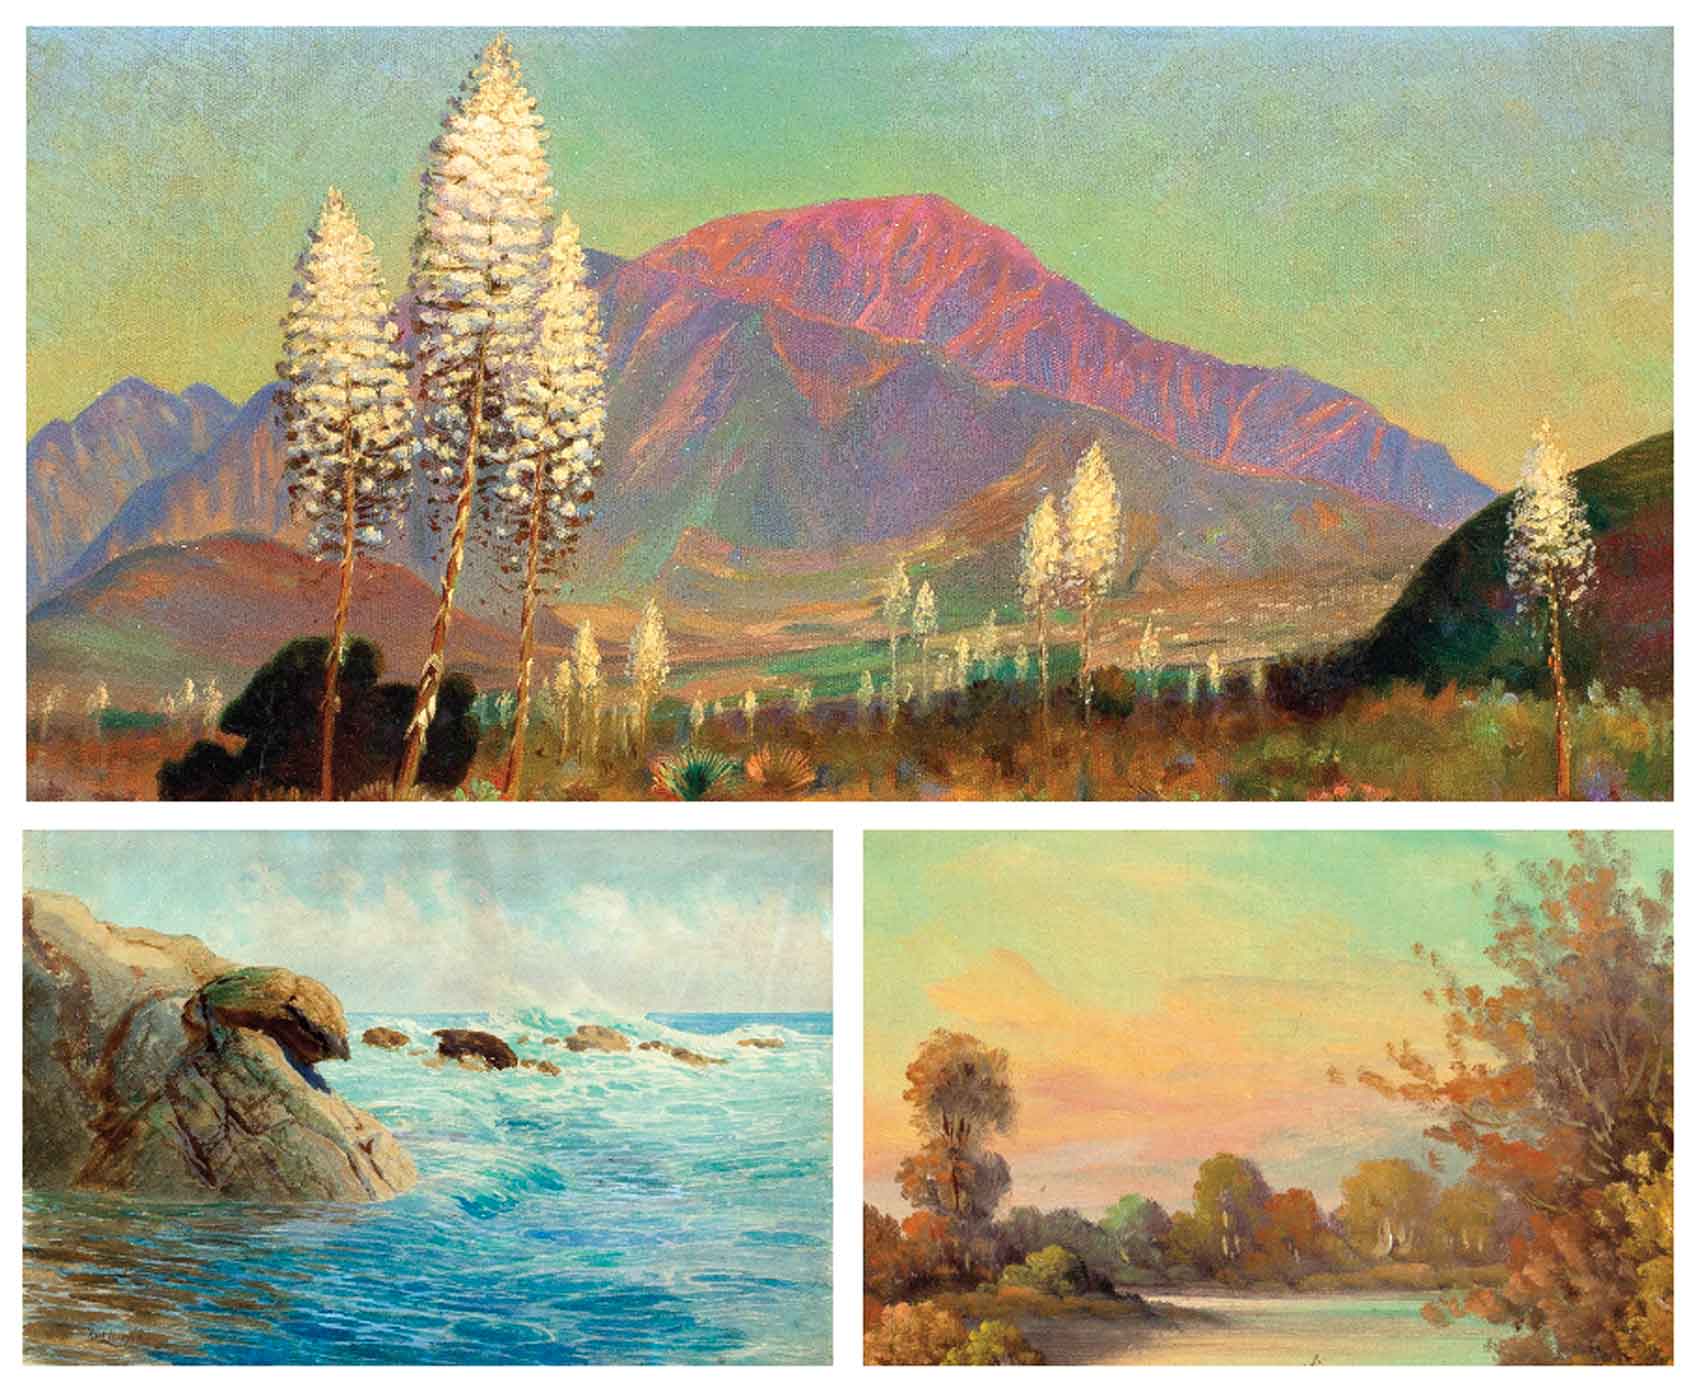  The Neddermans’ collection of plein air California paintings.